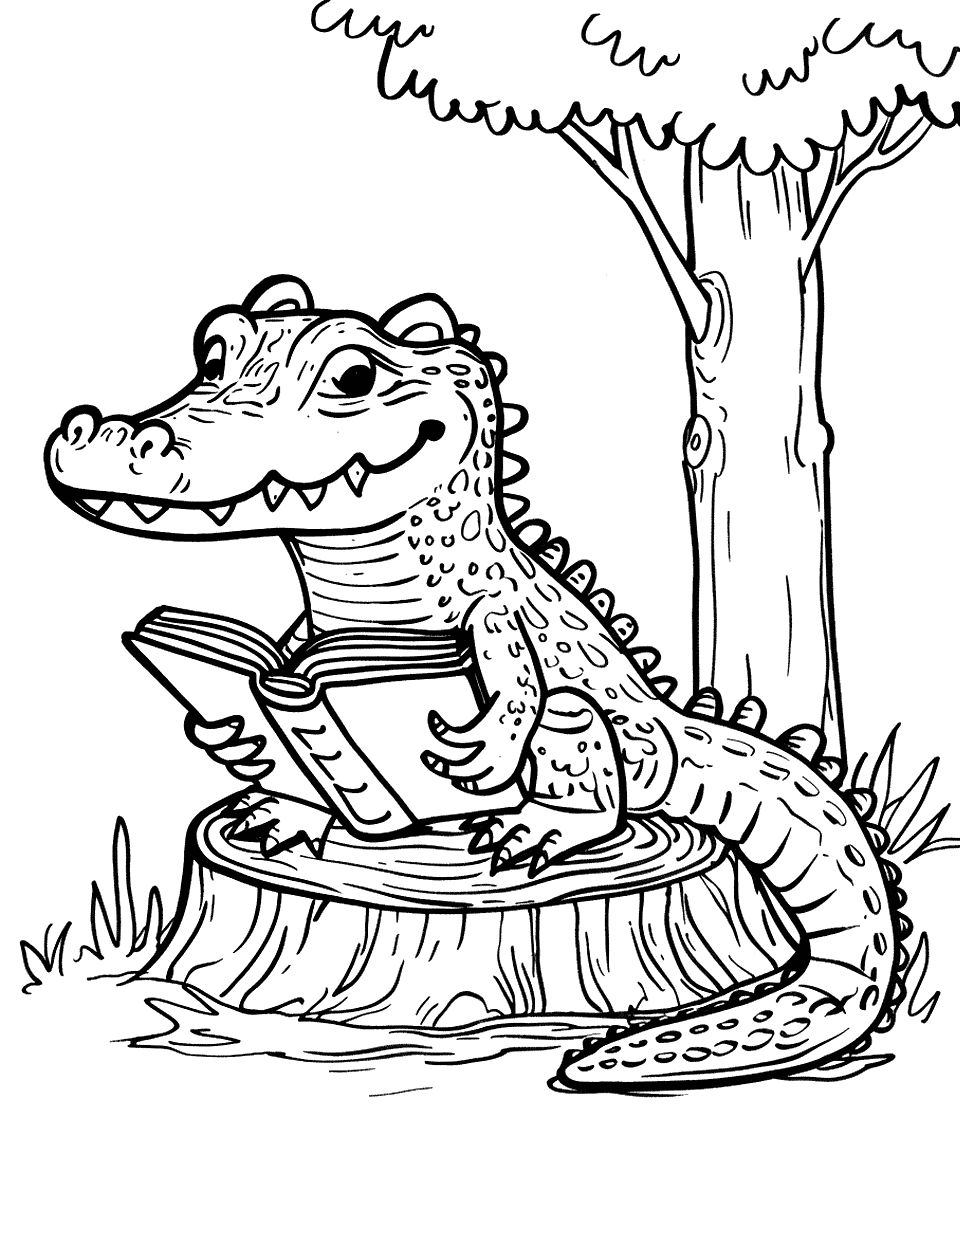 Alligator Reading a Book Coloring Page - An alligator sitting on a tree stump, reading a book under a tree.